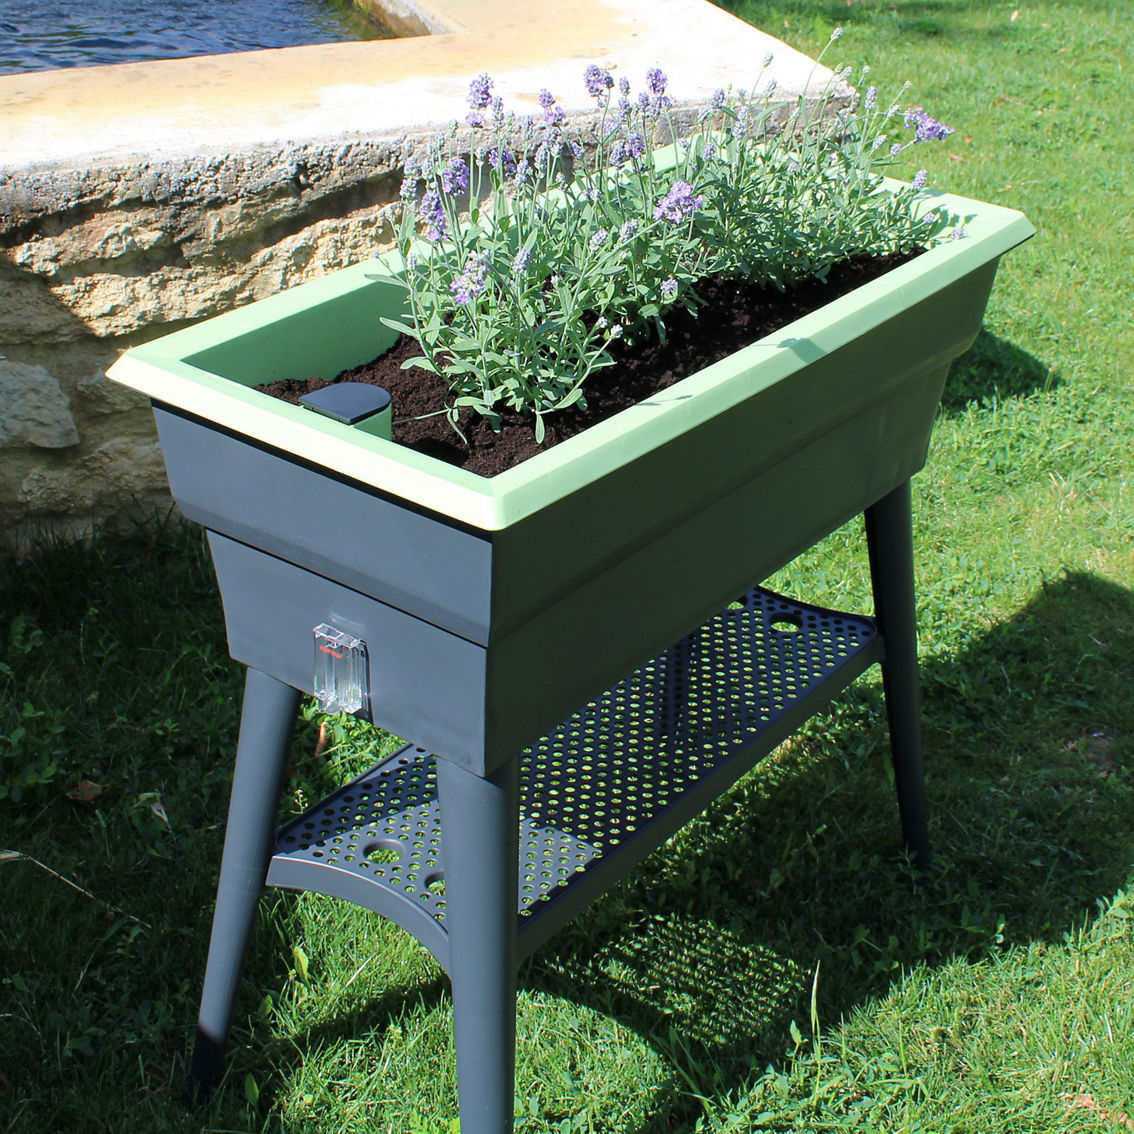 Bosmere Maxi 32 x 15 x 31.5 in. Self-Watering Plastic Raised Garden Bed - Image 2 of 8